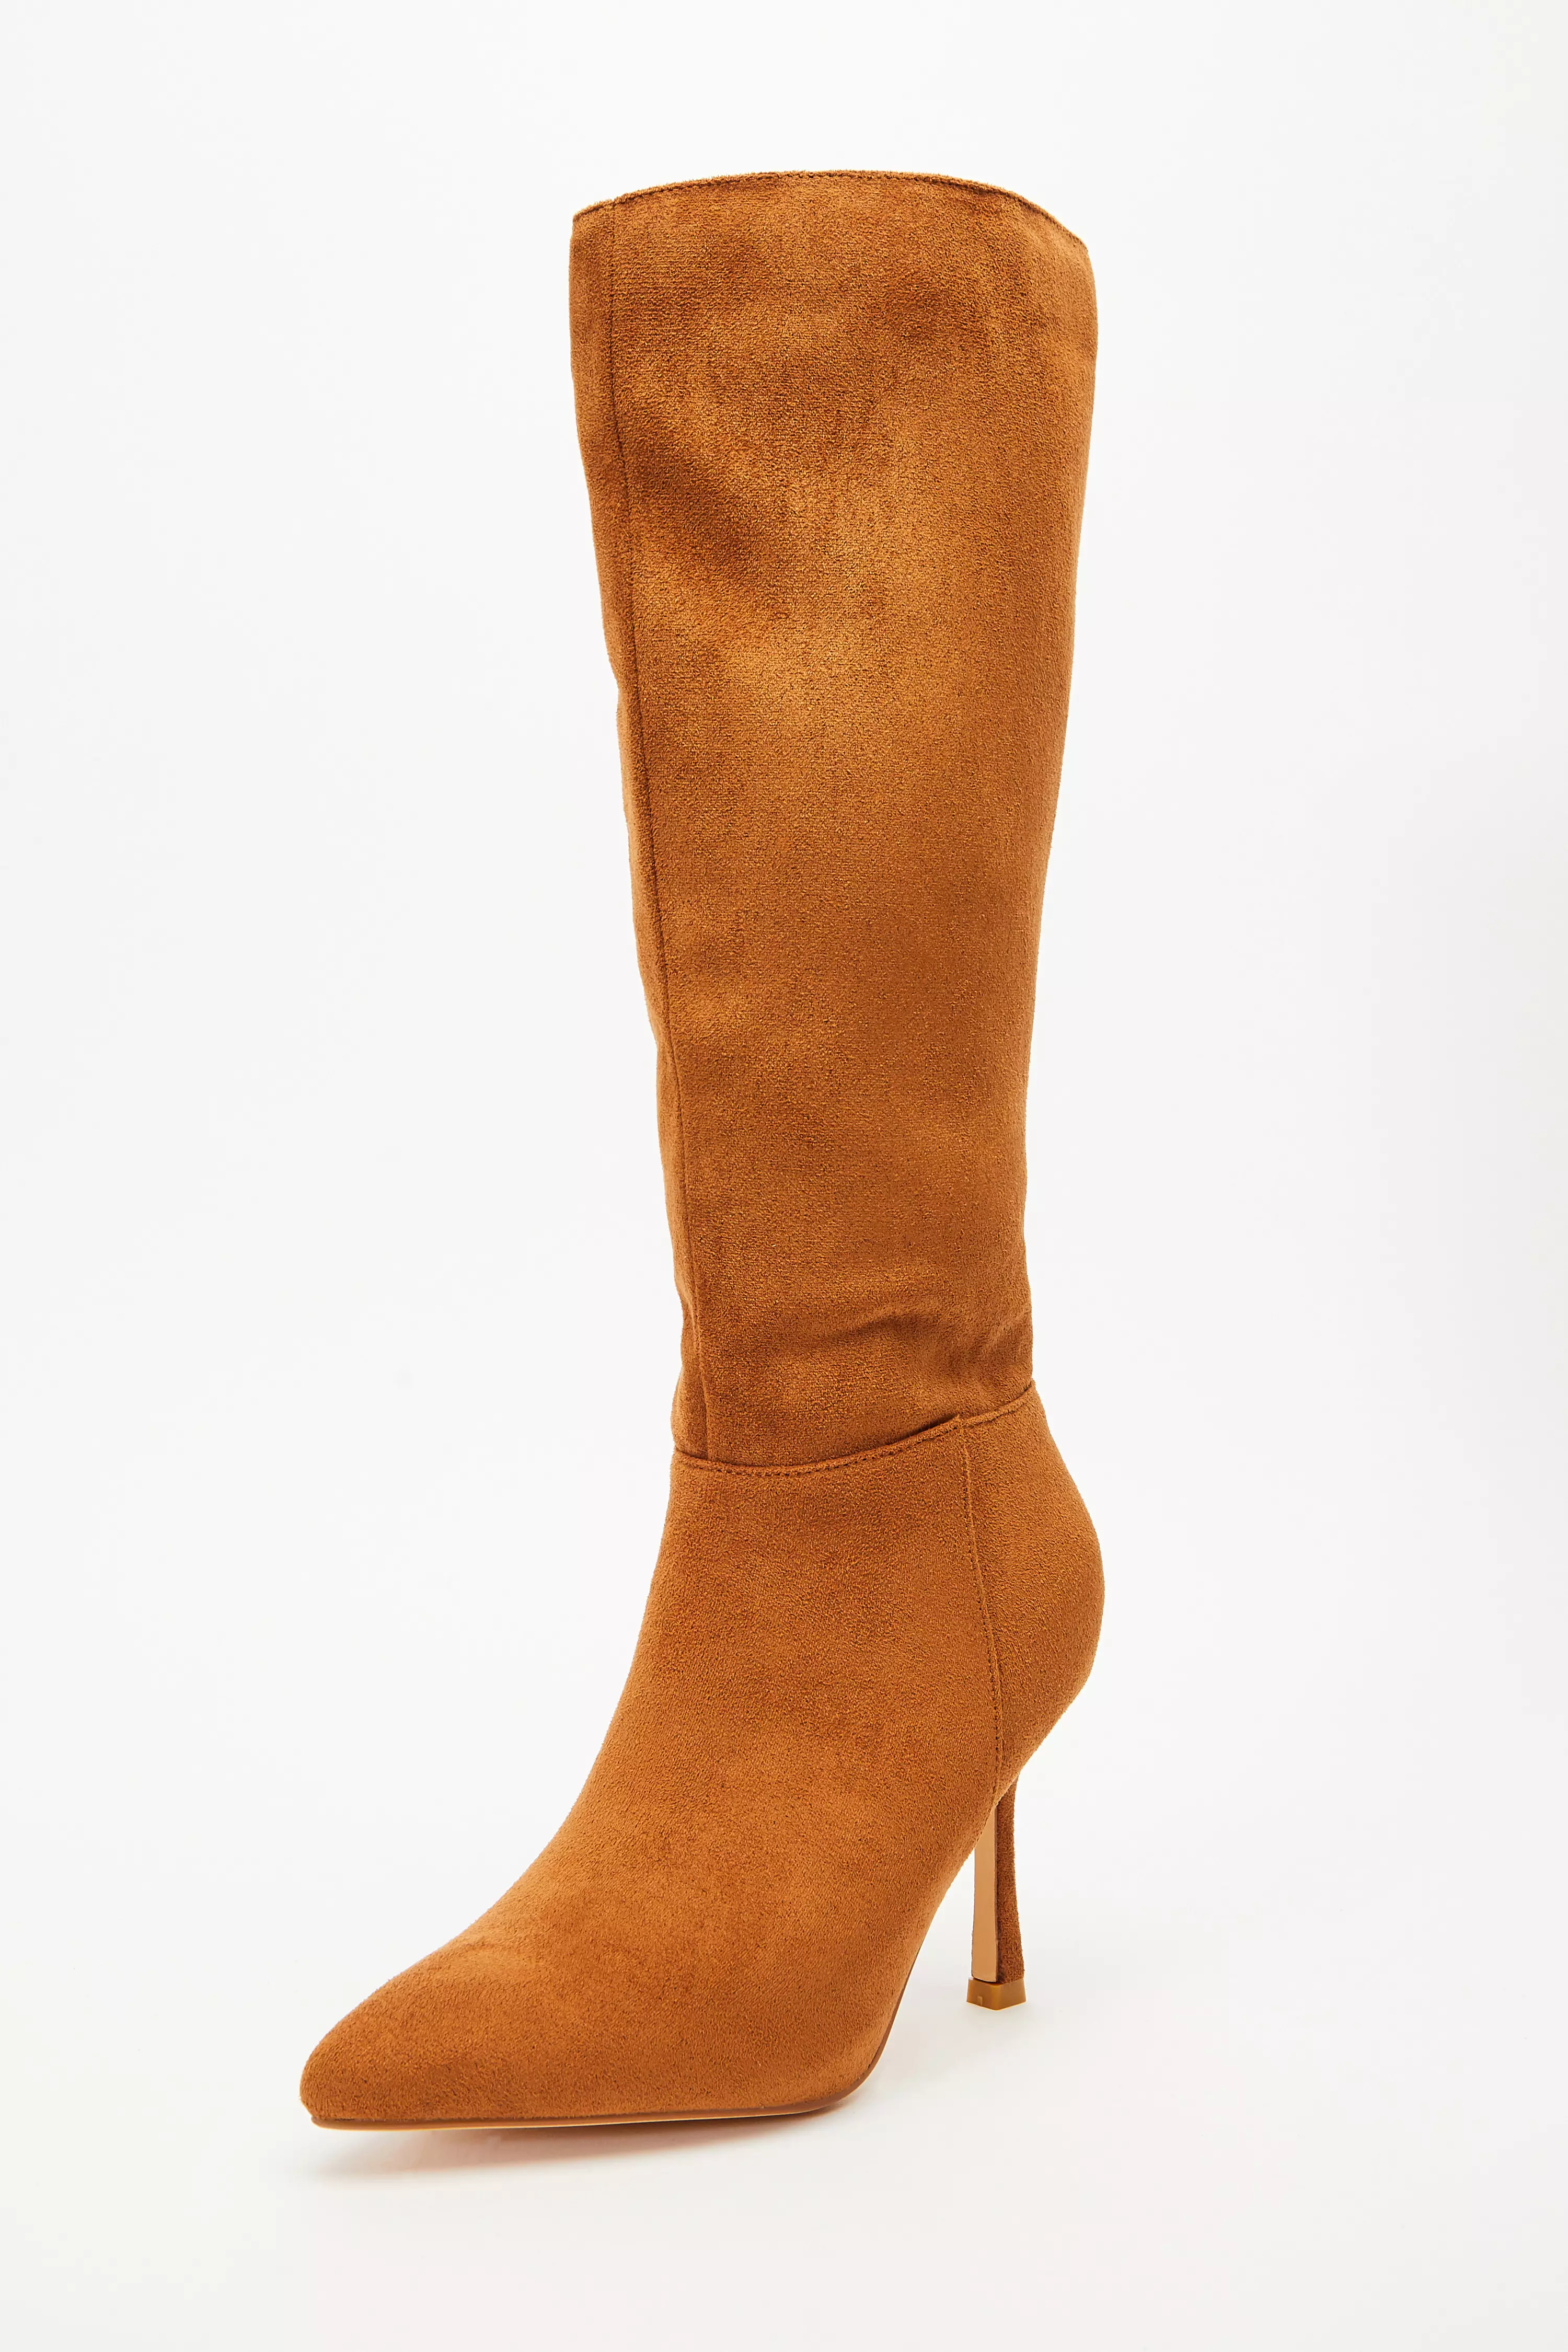 Tan Faux Suede Knee High Heeled Boots